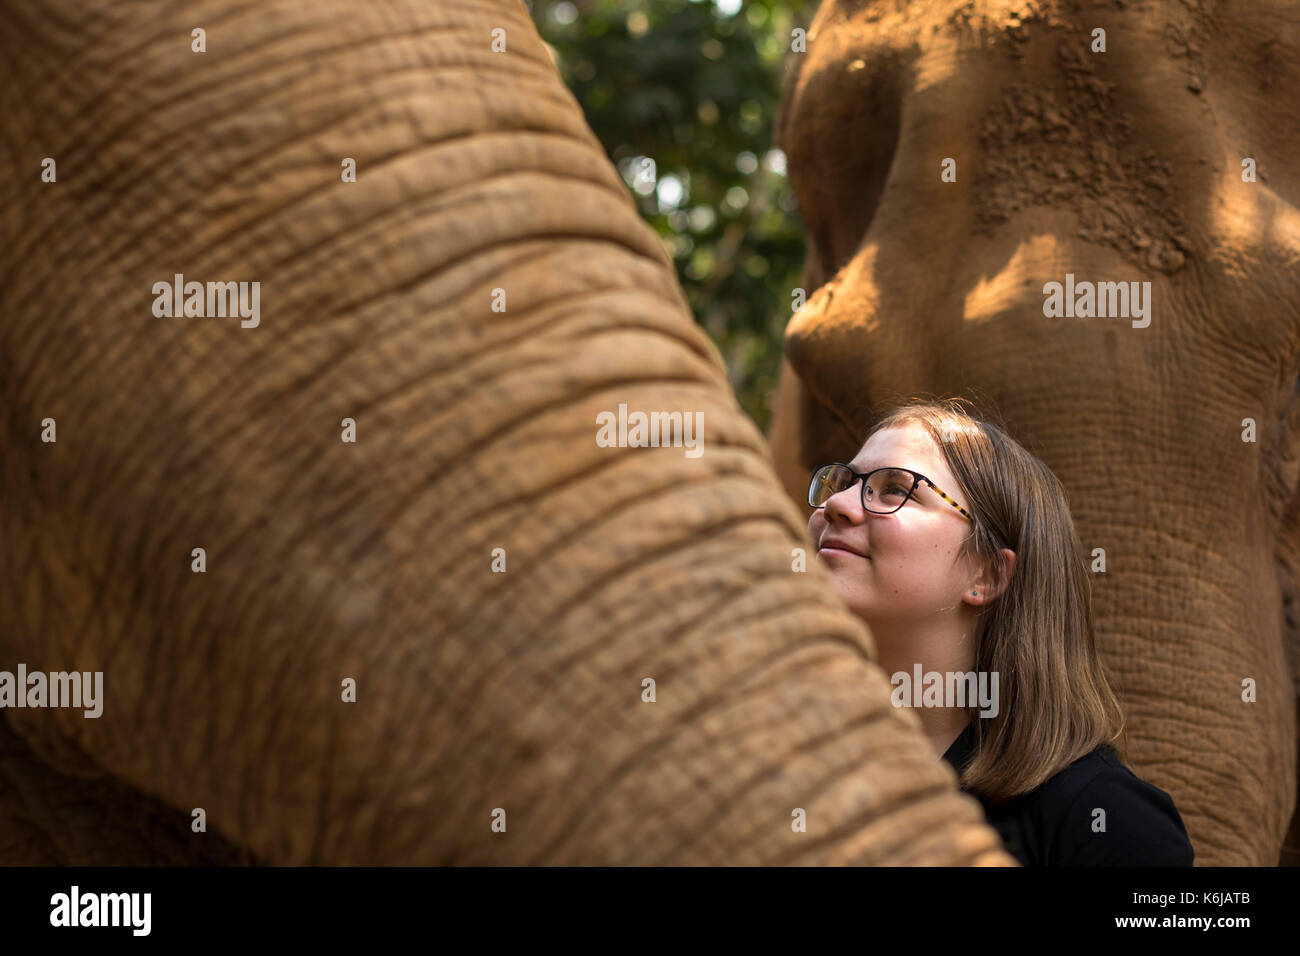 Girl smiling and standing by giant elephant, Chiang Mai, Thailand Stock Photo